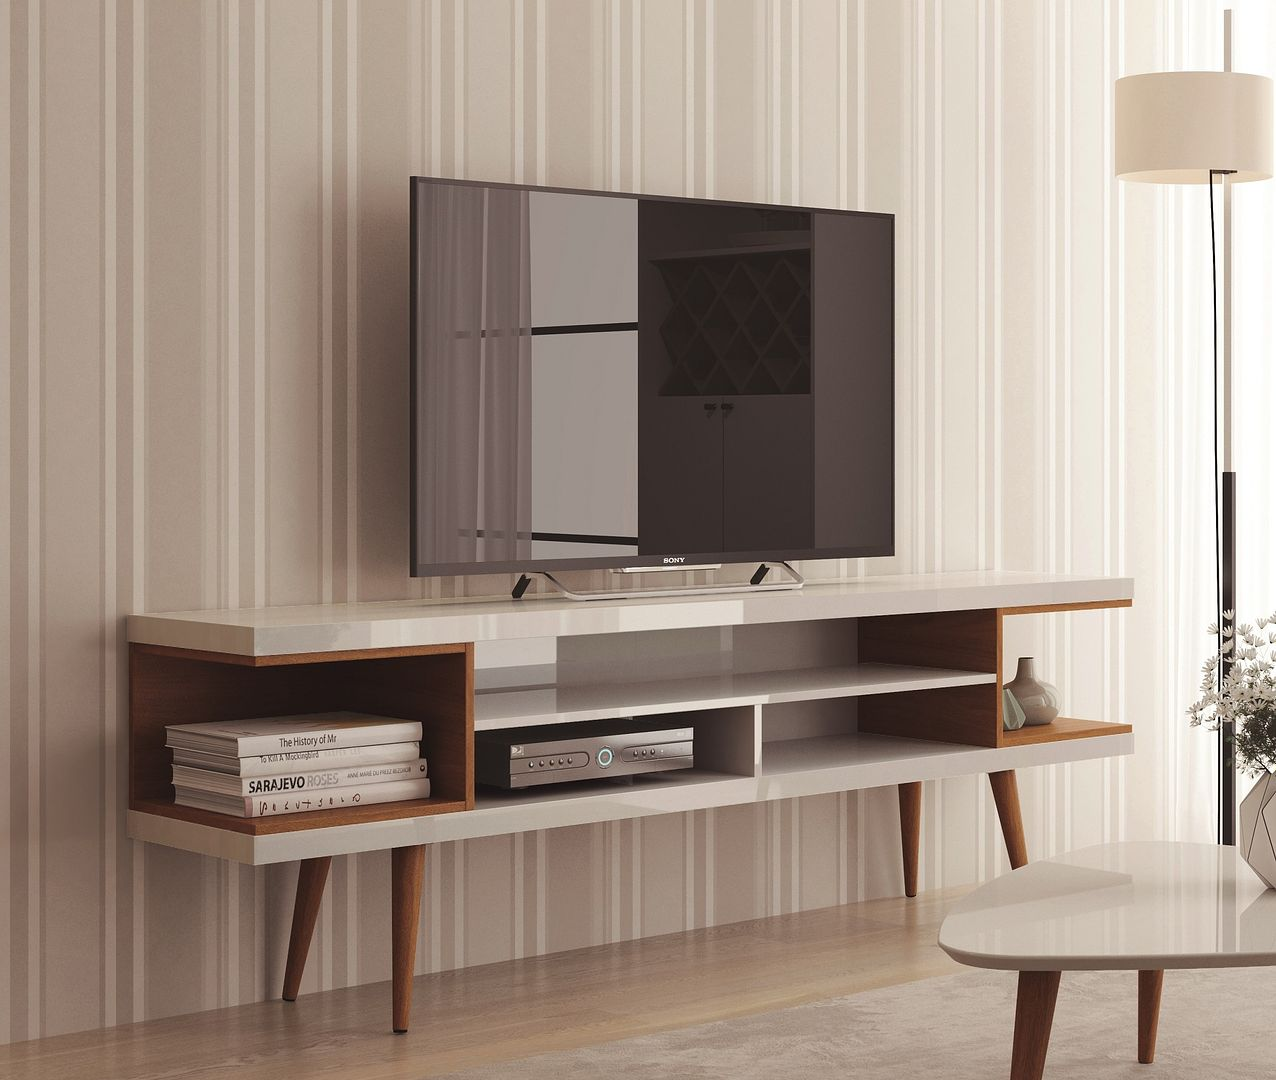 Utopia 70.47" TV Stand with Splayed Wooden Legs and 4 Shelves in White Gloss and Maple Cream